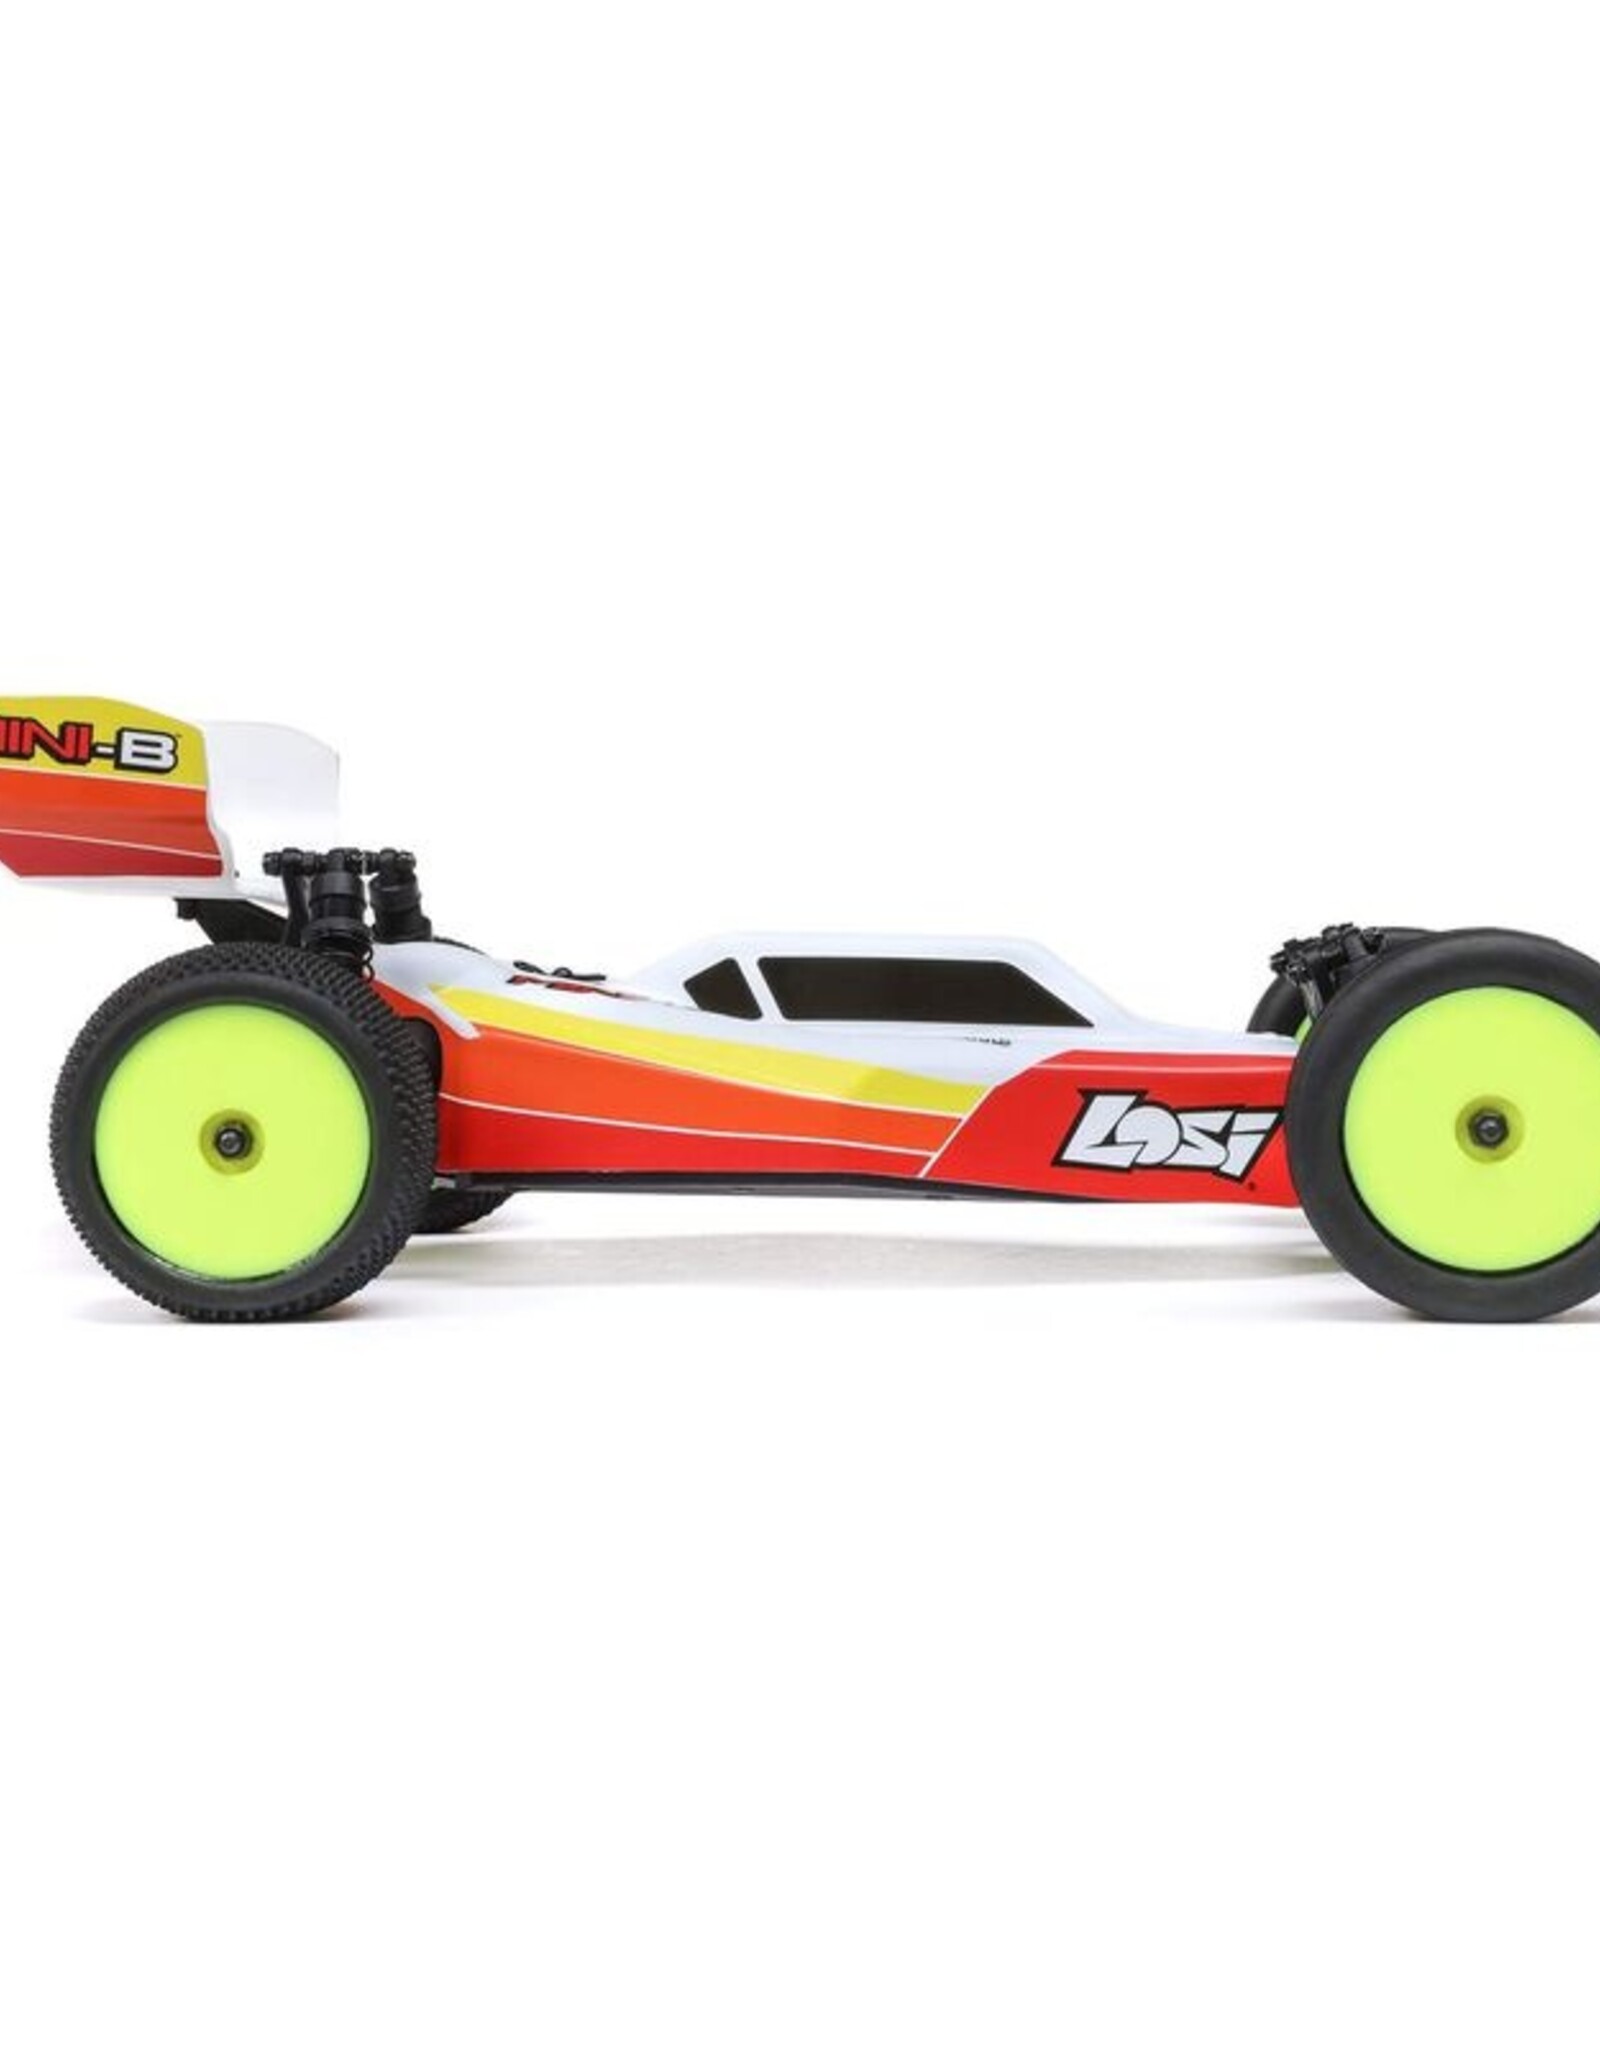 Losi LOS01024T1 1/16 Mini-B 2WD Buggy Brushless RTR, Red